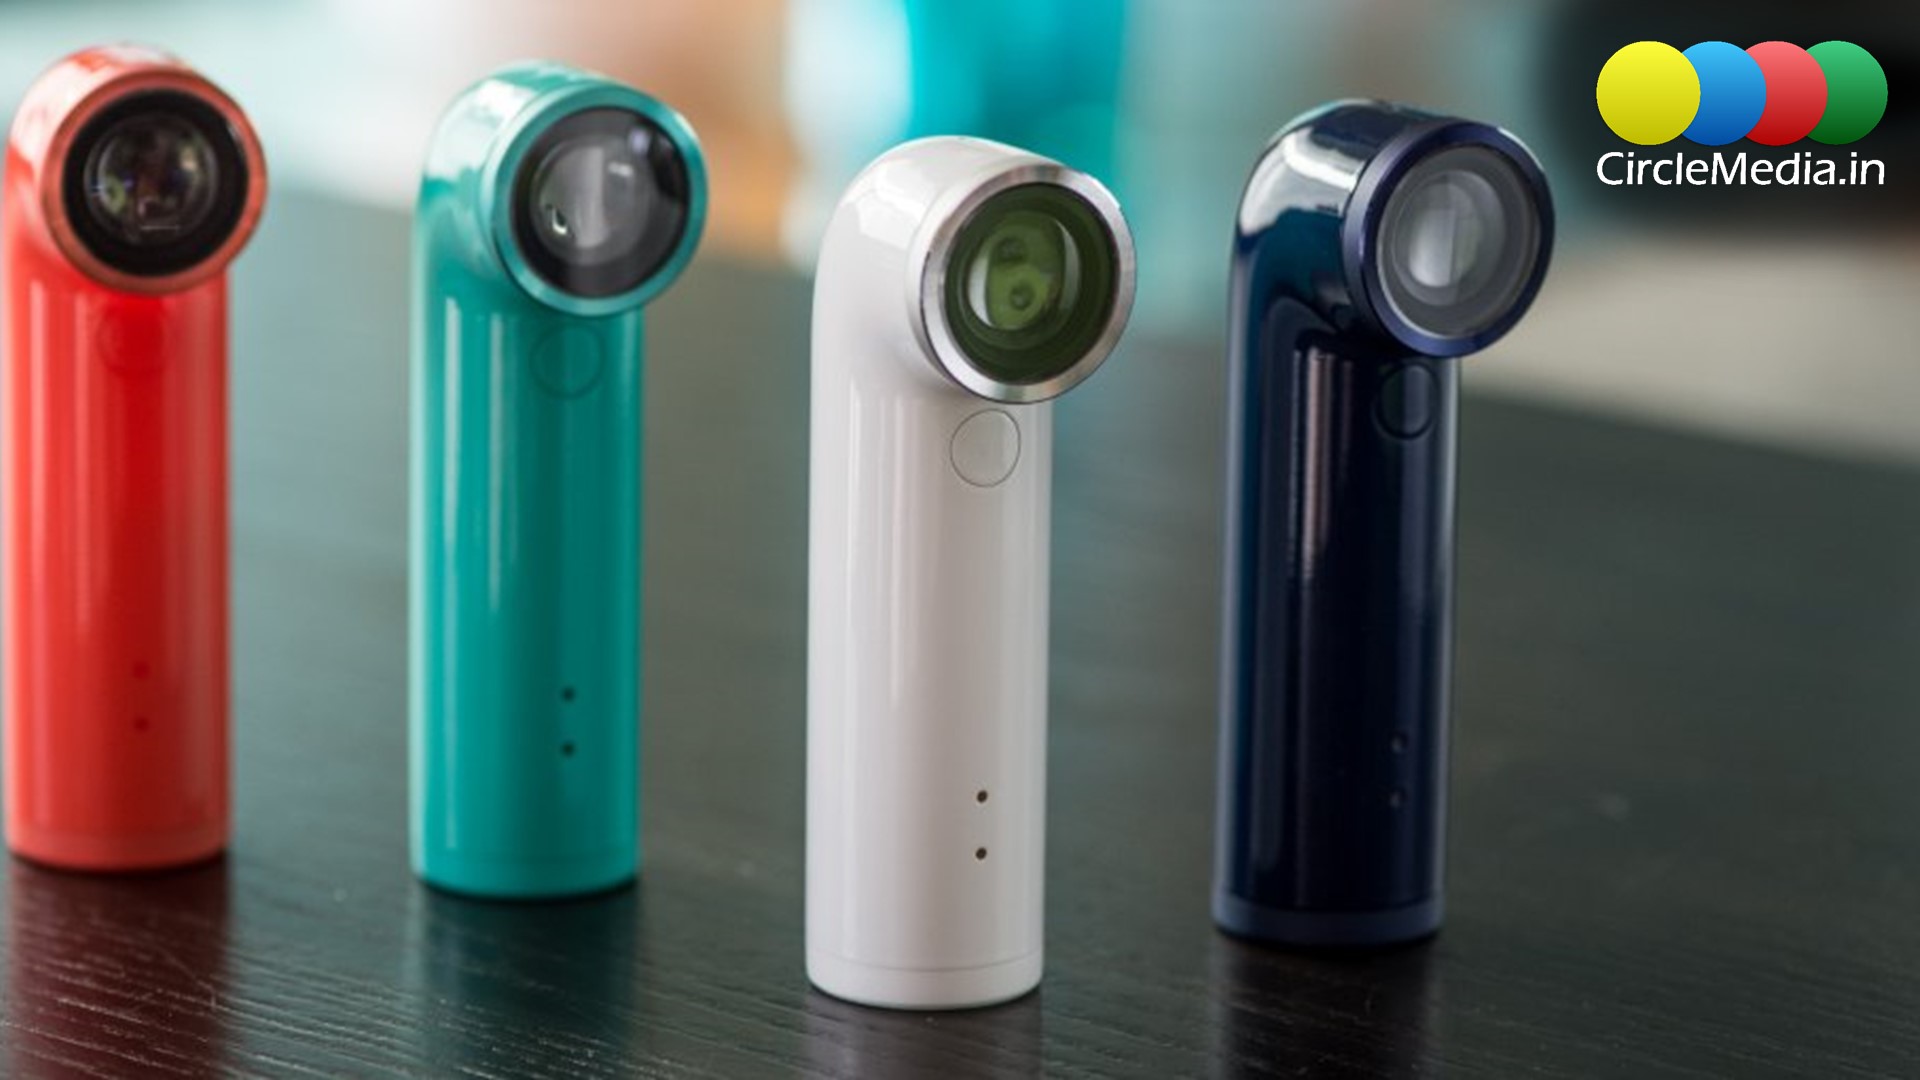 HTC Re Action Camera Review, Best Action Cameras, GoPro Alternative Cameras